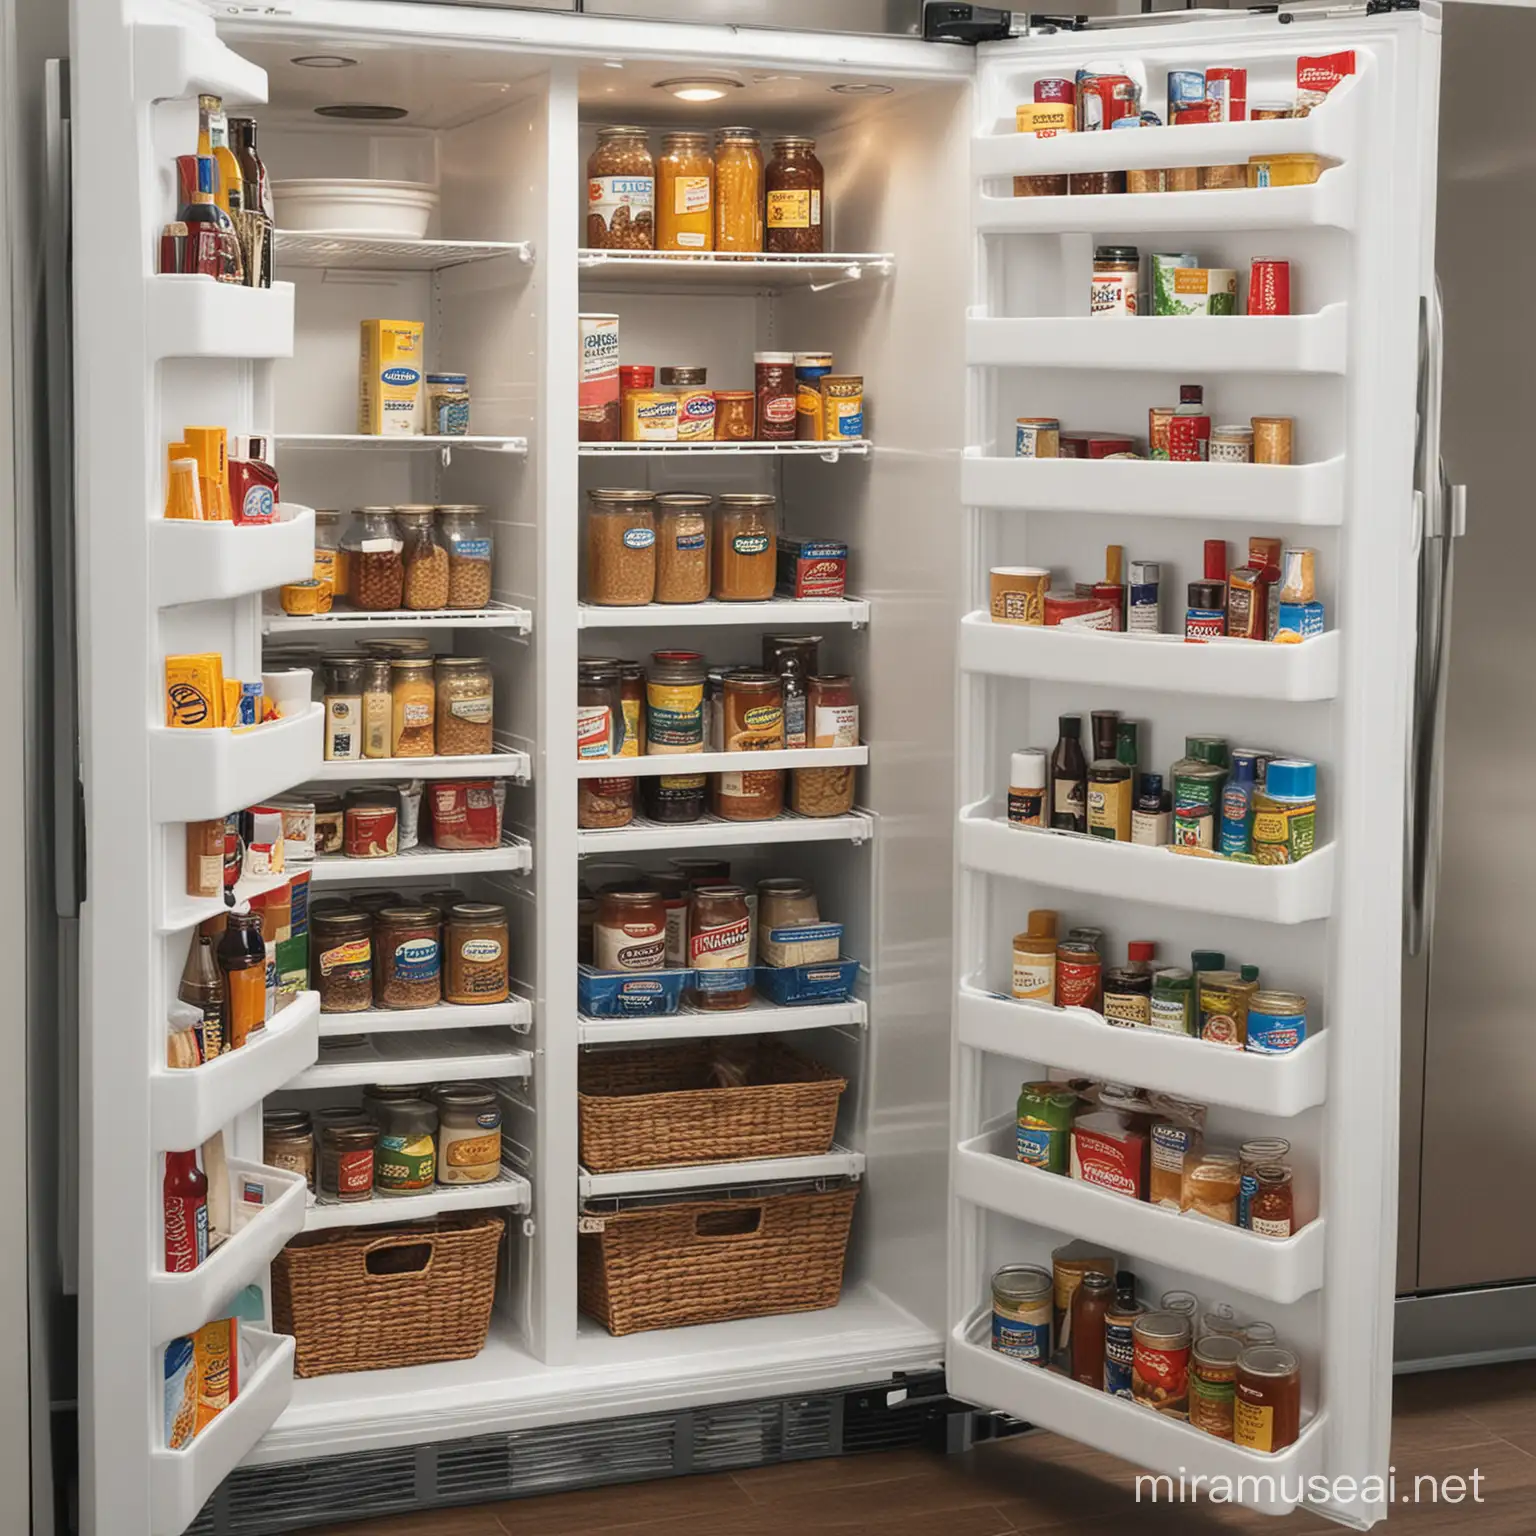 Organized Refrigerator Pantry with Seasonal Produce and EcoFriendly Storage Containers